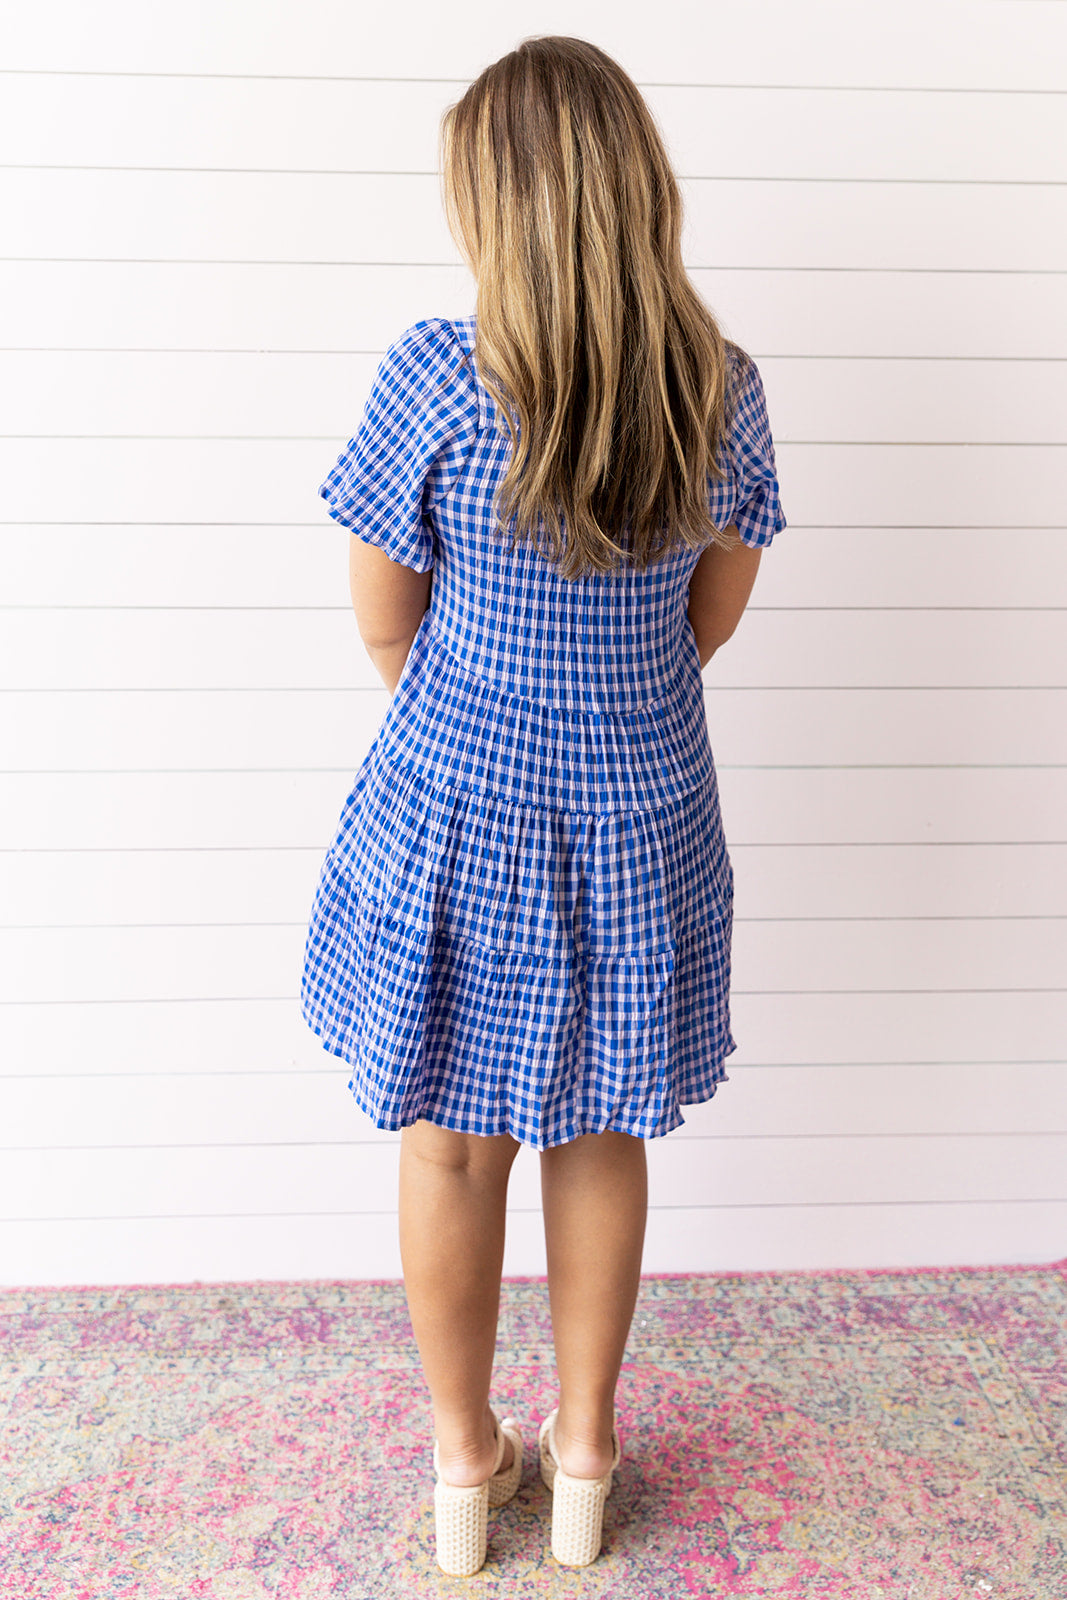 Girly and Gingham